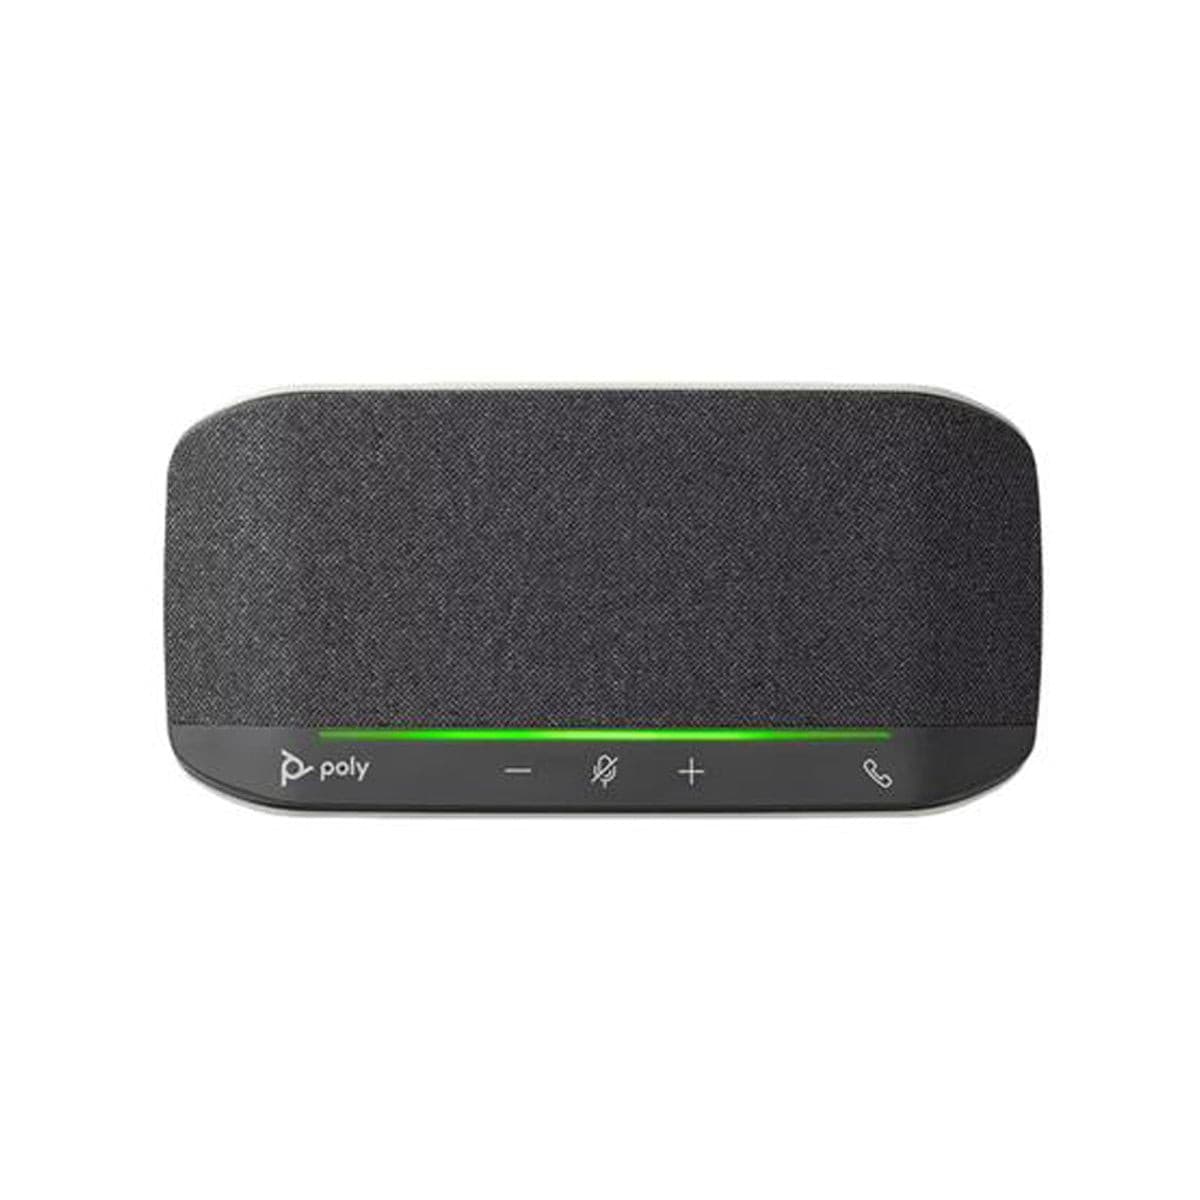 Poly Sync 10 USB Conference Speakerphone for Home Office.